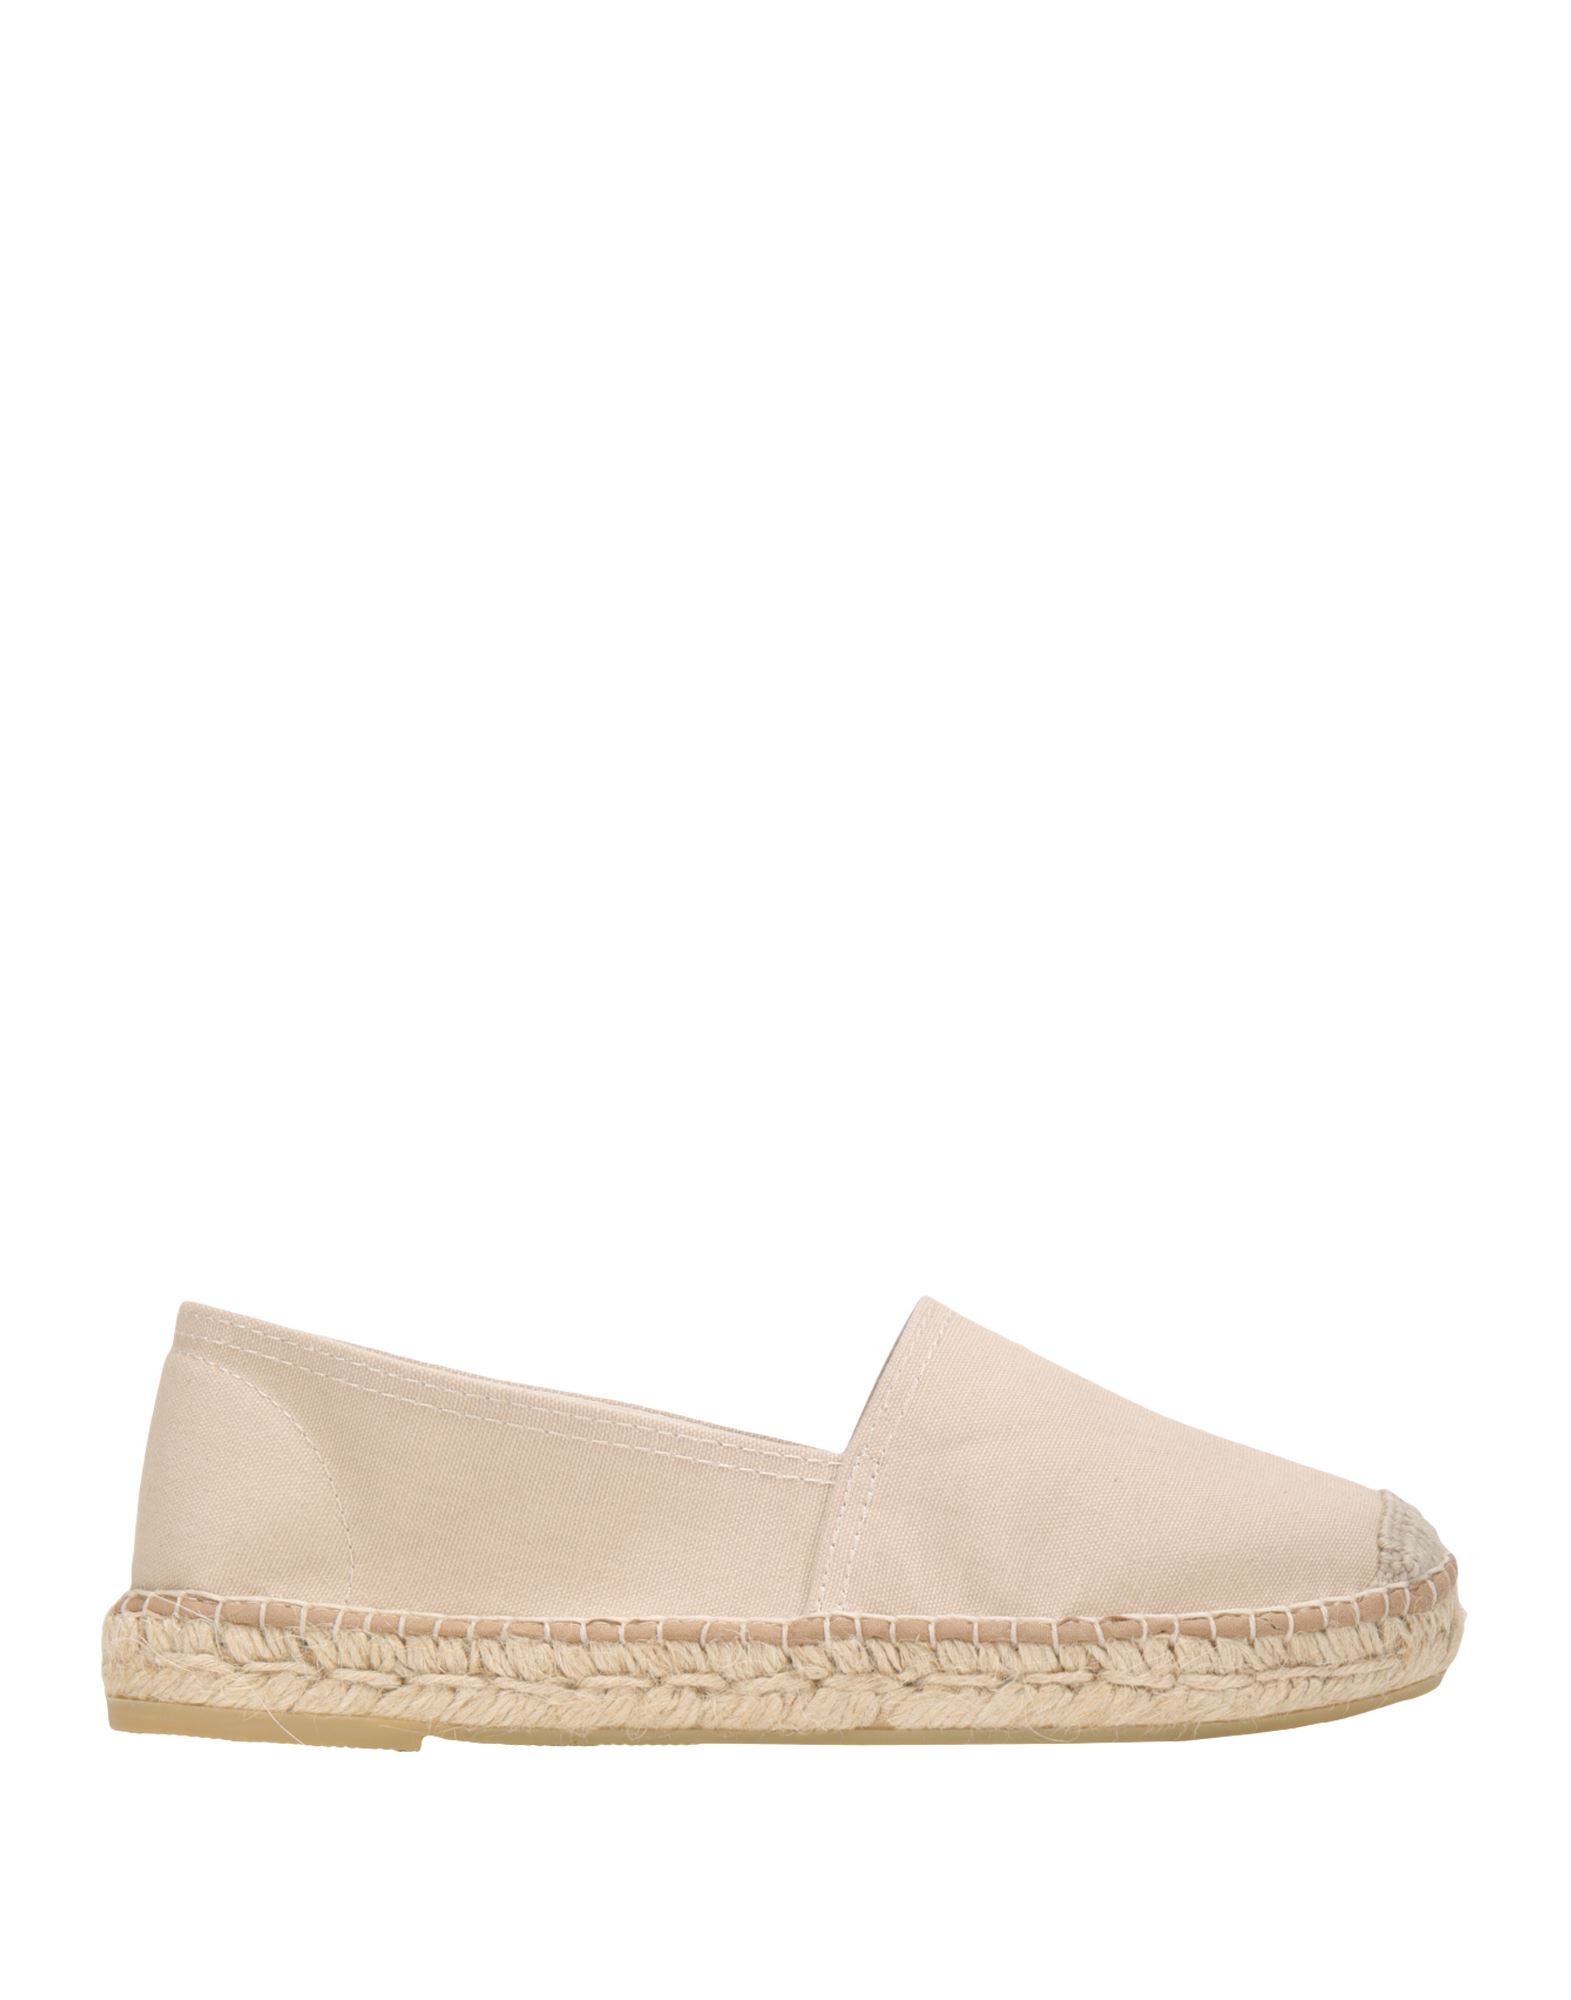 8 BY YOOX 8 BY YOOX POVEDA TEXTIL WOMAN ESPADRILLES BEIGE SIZE 11 ORGANIC COTTON,17036962TS 7